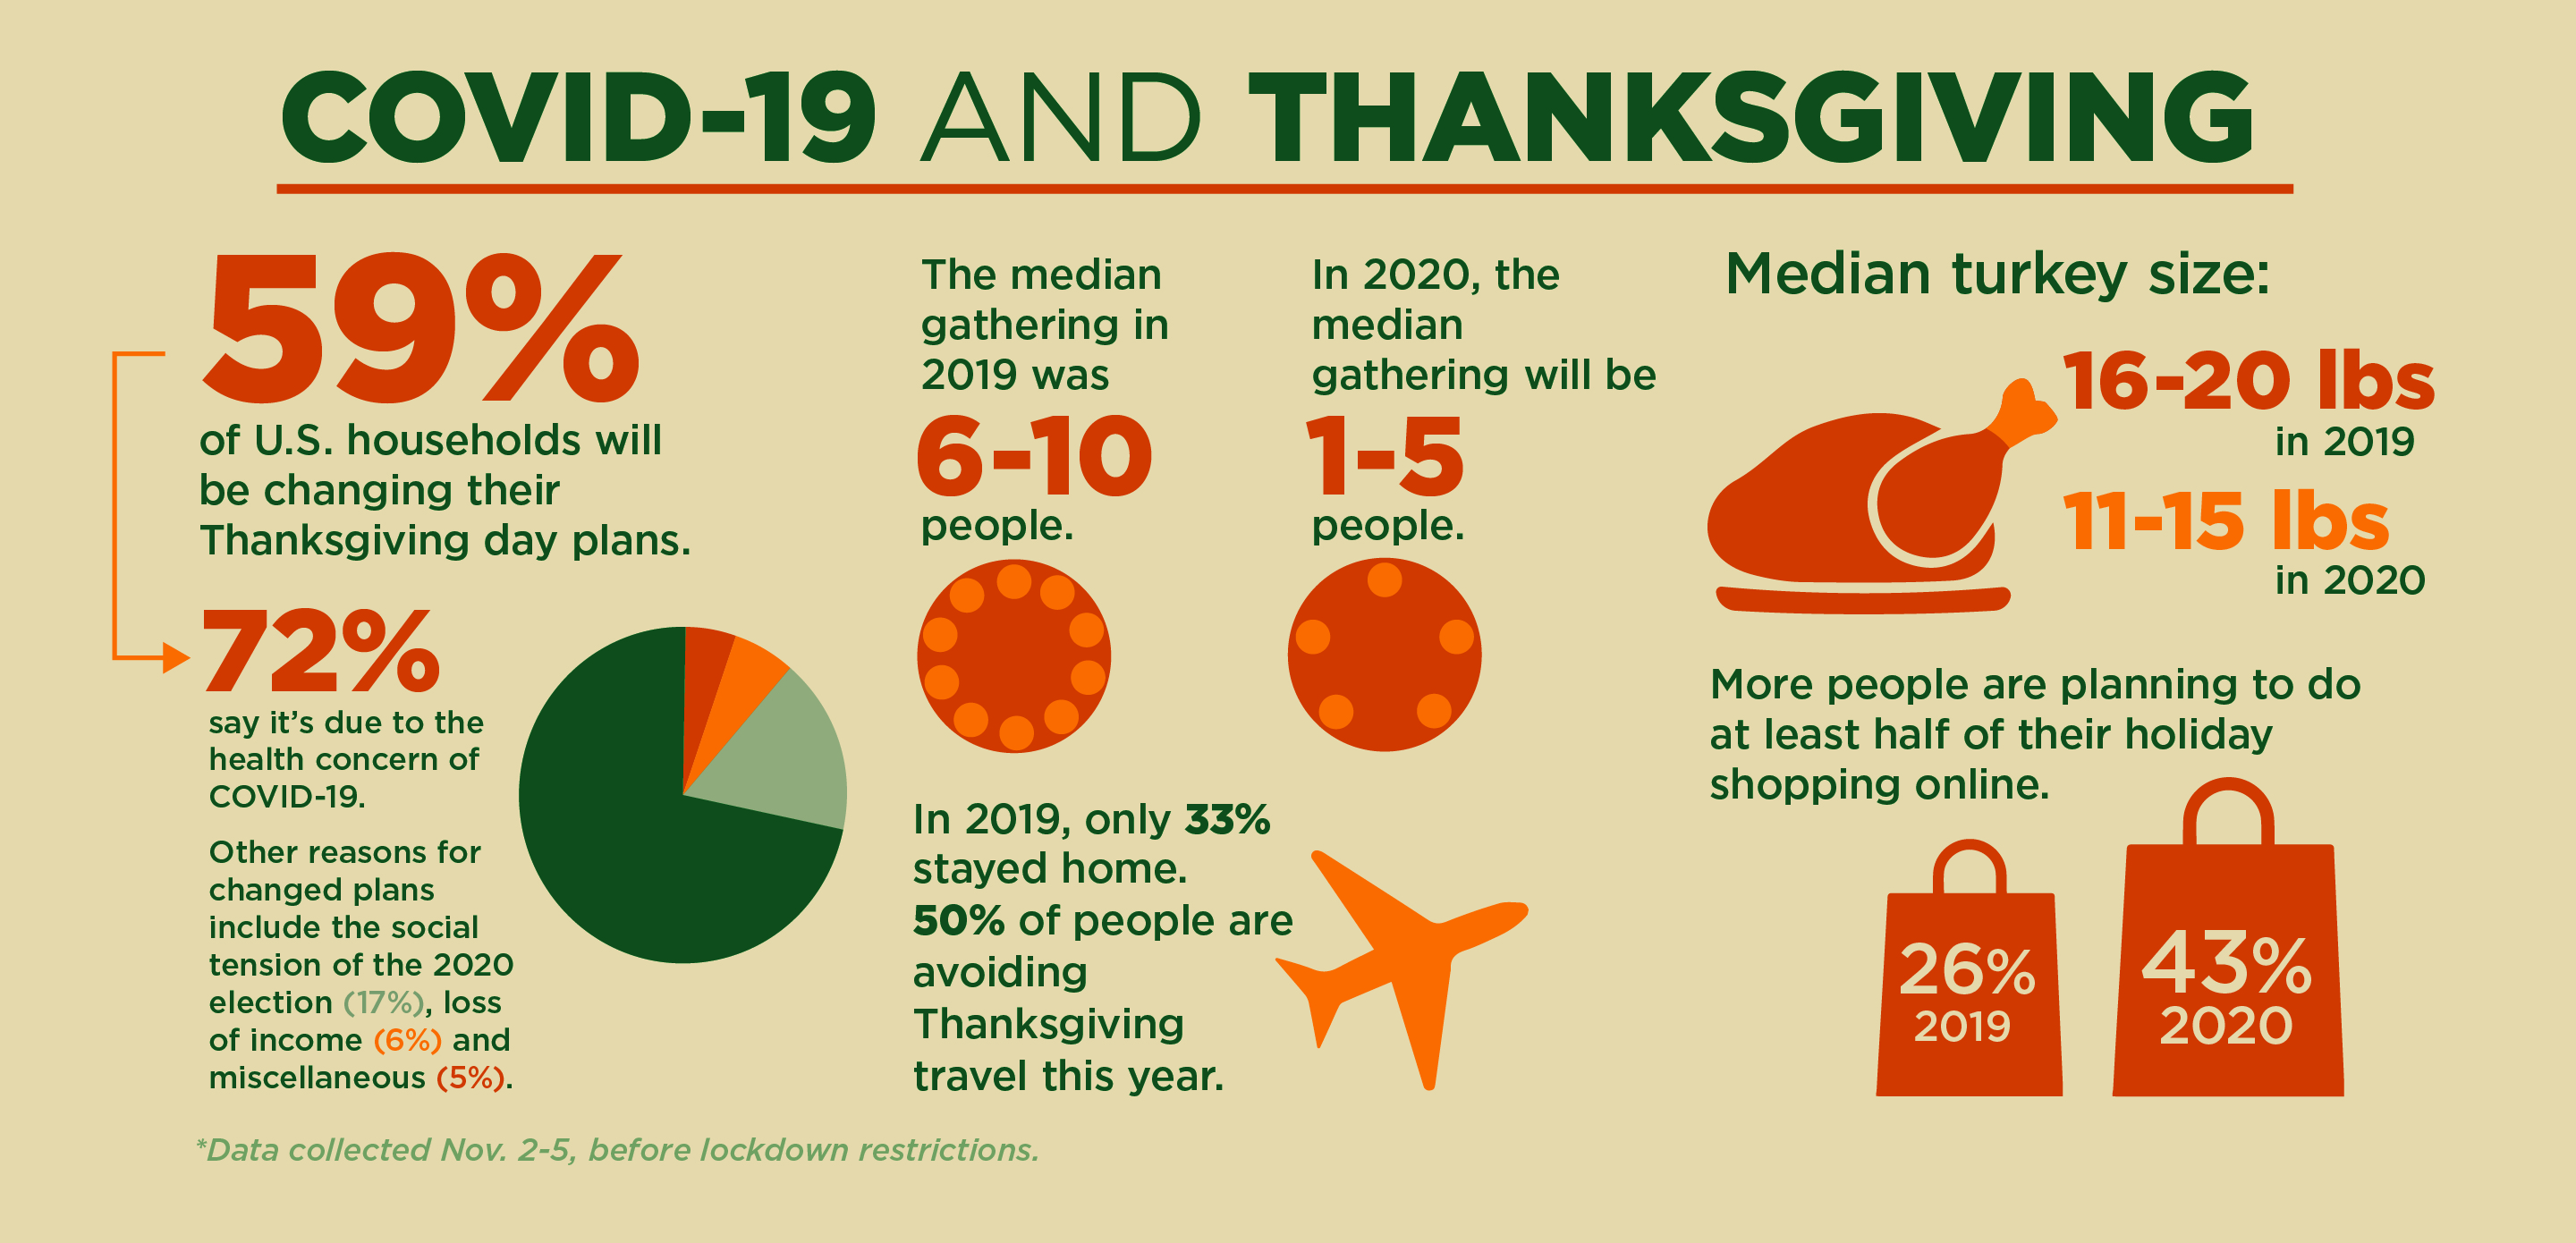 Thanksgiving and COVID-19 infographic